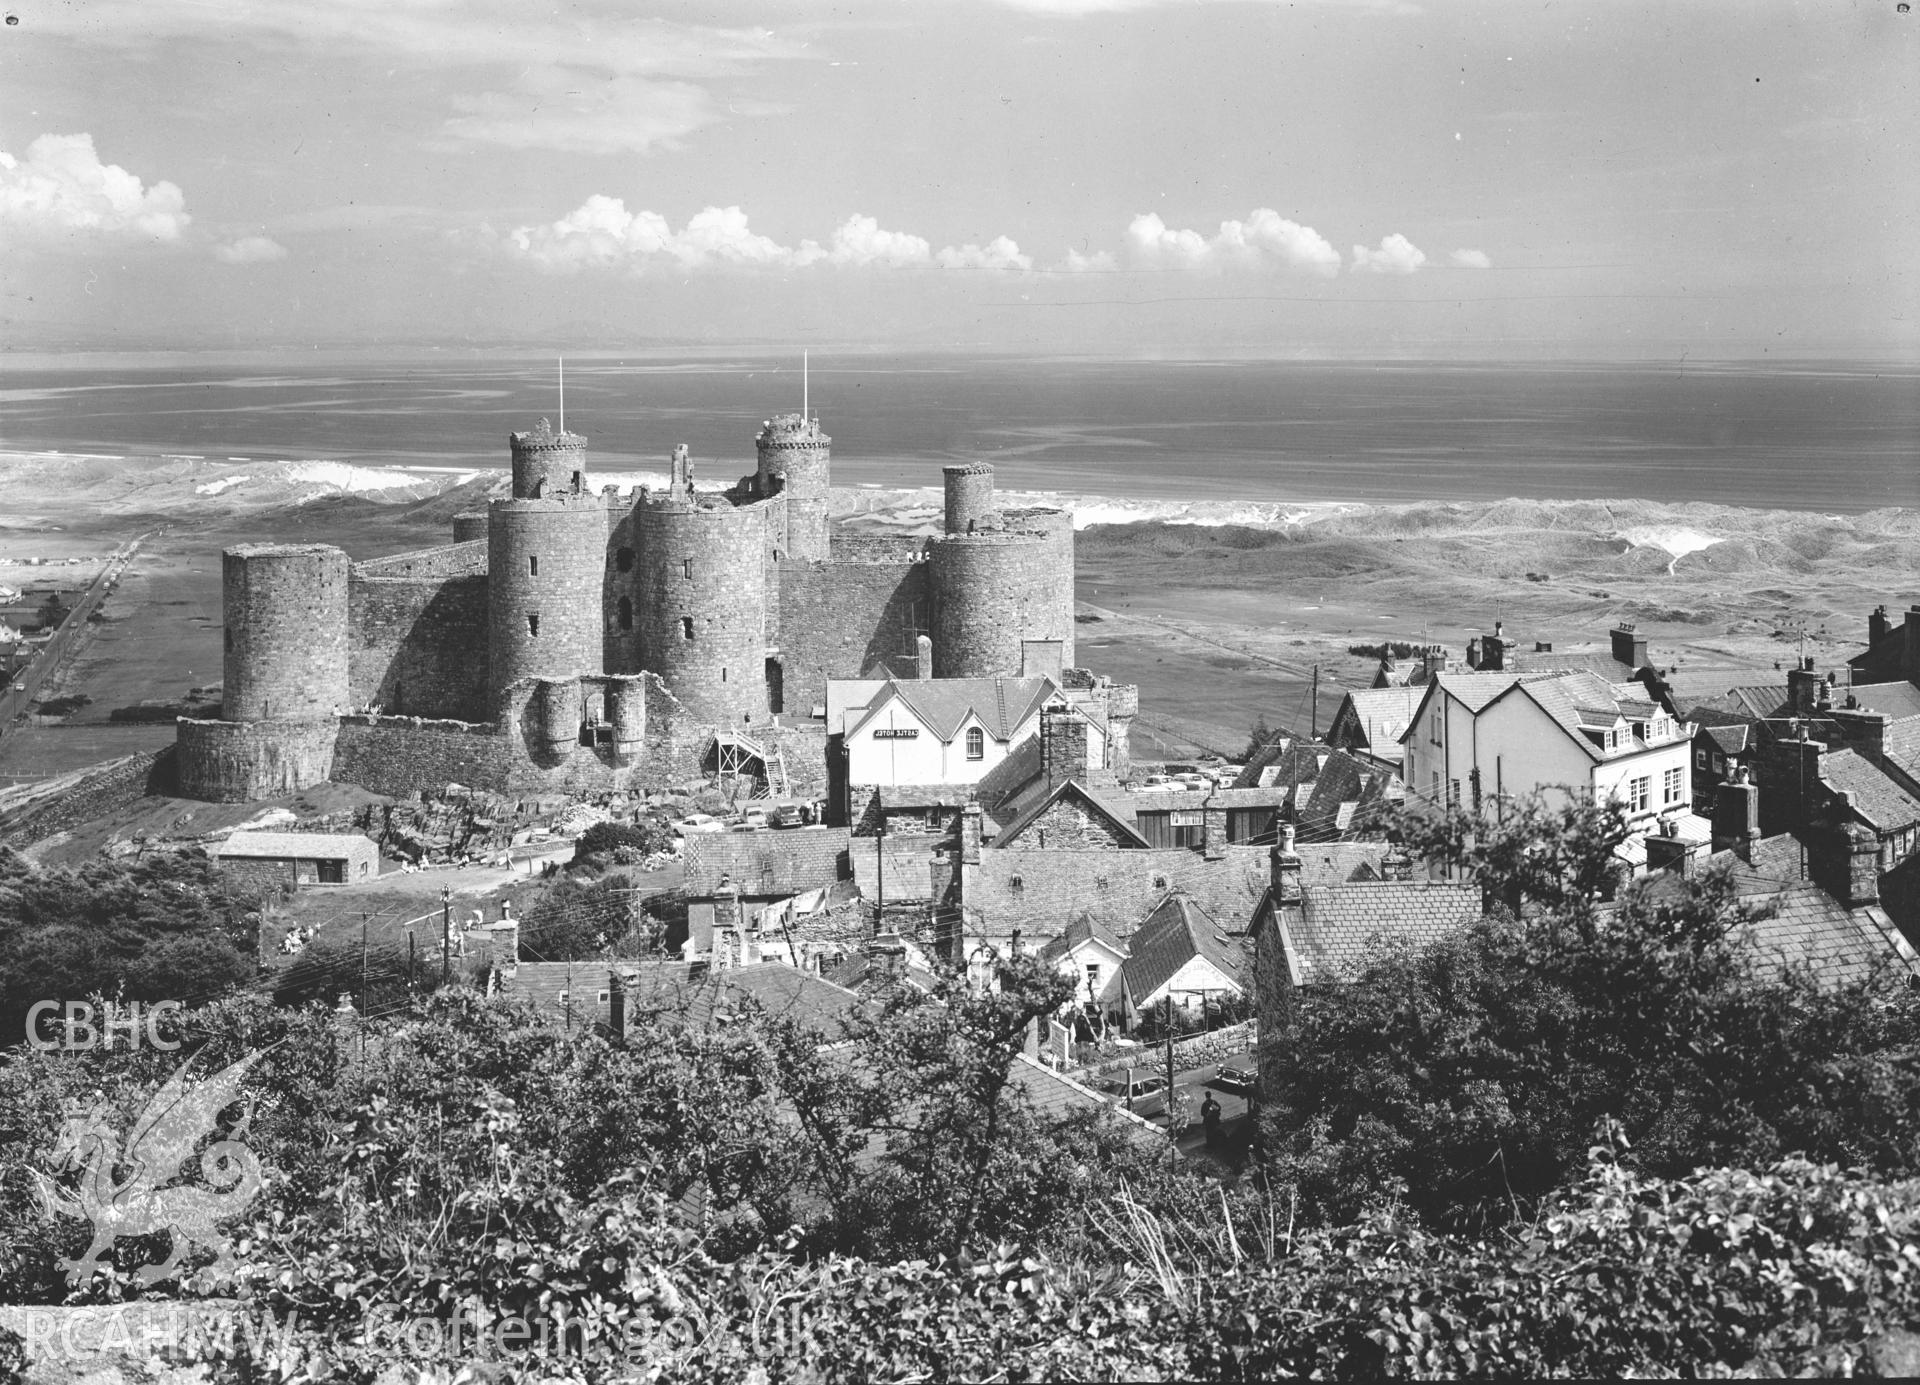 Digital copy of a black and white negative showing general view of Harlech Castle.